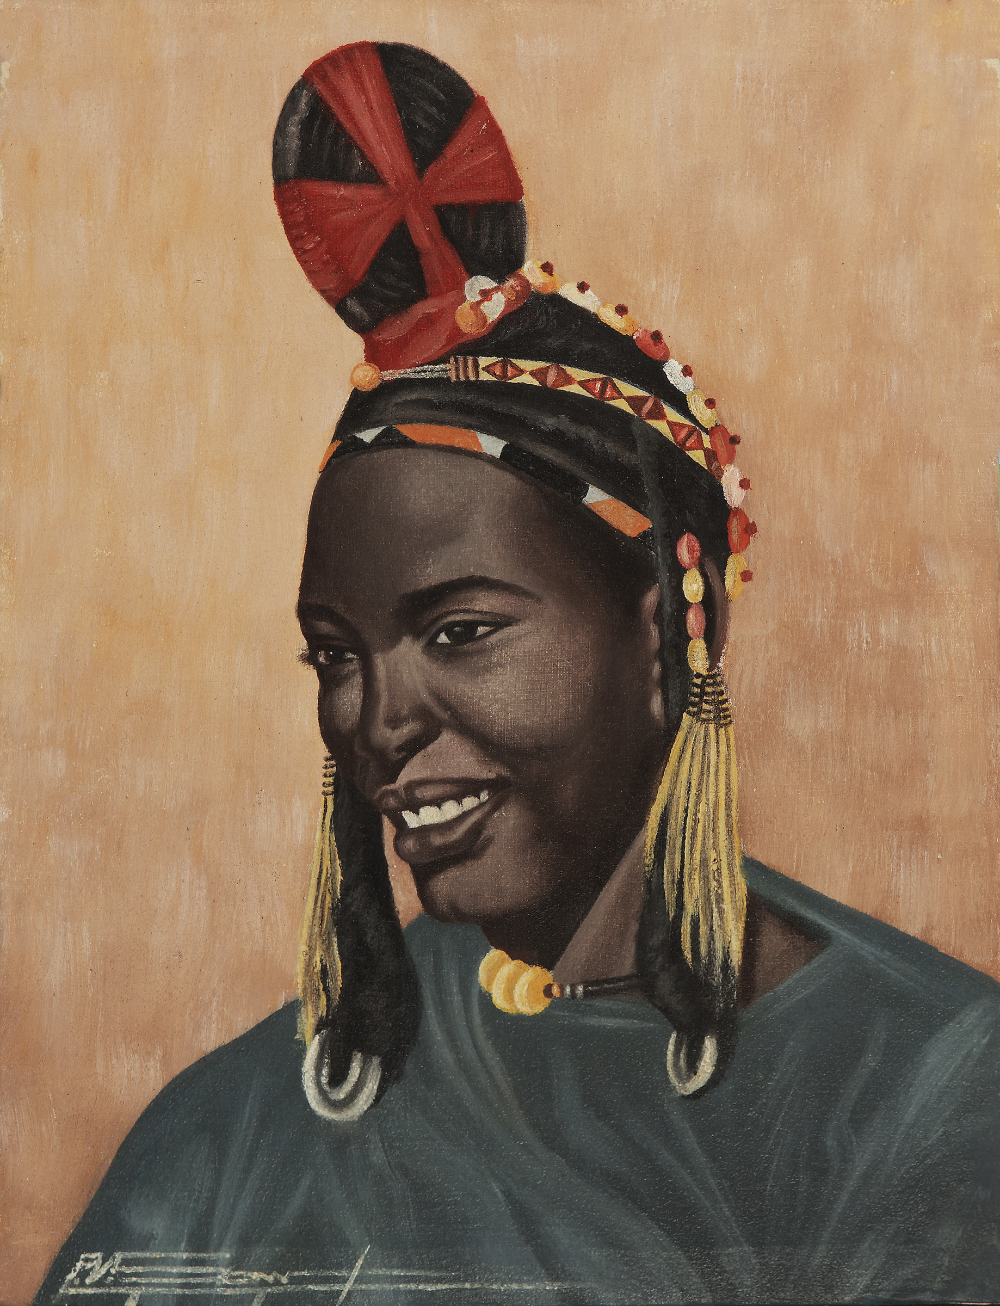 thumbnail of Songhay Woman. medium: oil on fabric with varnished highslights. date: 1968. dimensions: 38.5 x 29.7 cm